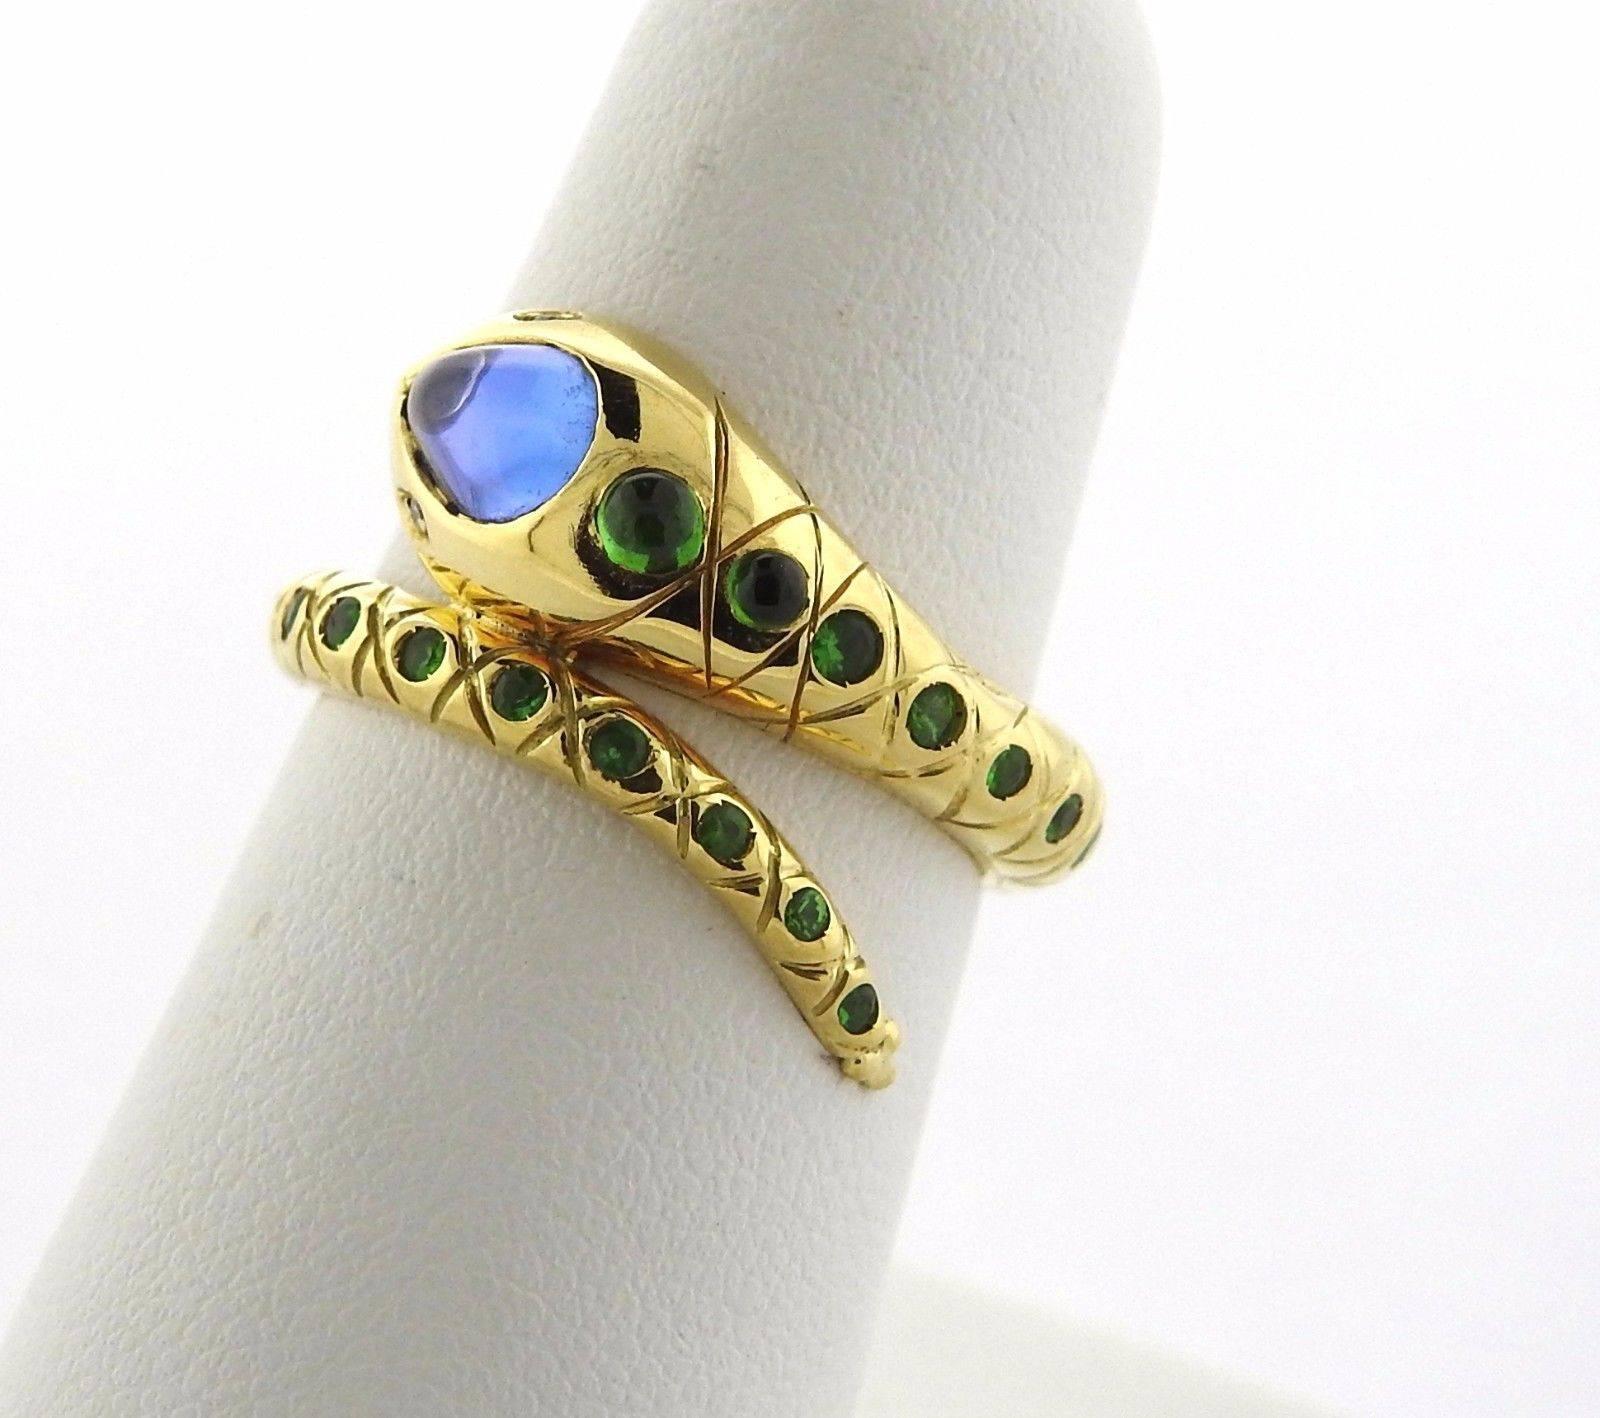 An 18k yellow gold serpent ring set with tanzanite, tsavorite and a diamond.  The ring is a size 6.25 Ring top is 10mm at widest point.  Marked: Temple Mark, 750.  The weight of the piece is 8 grams.  Retail is $3500.